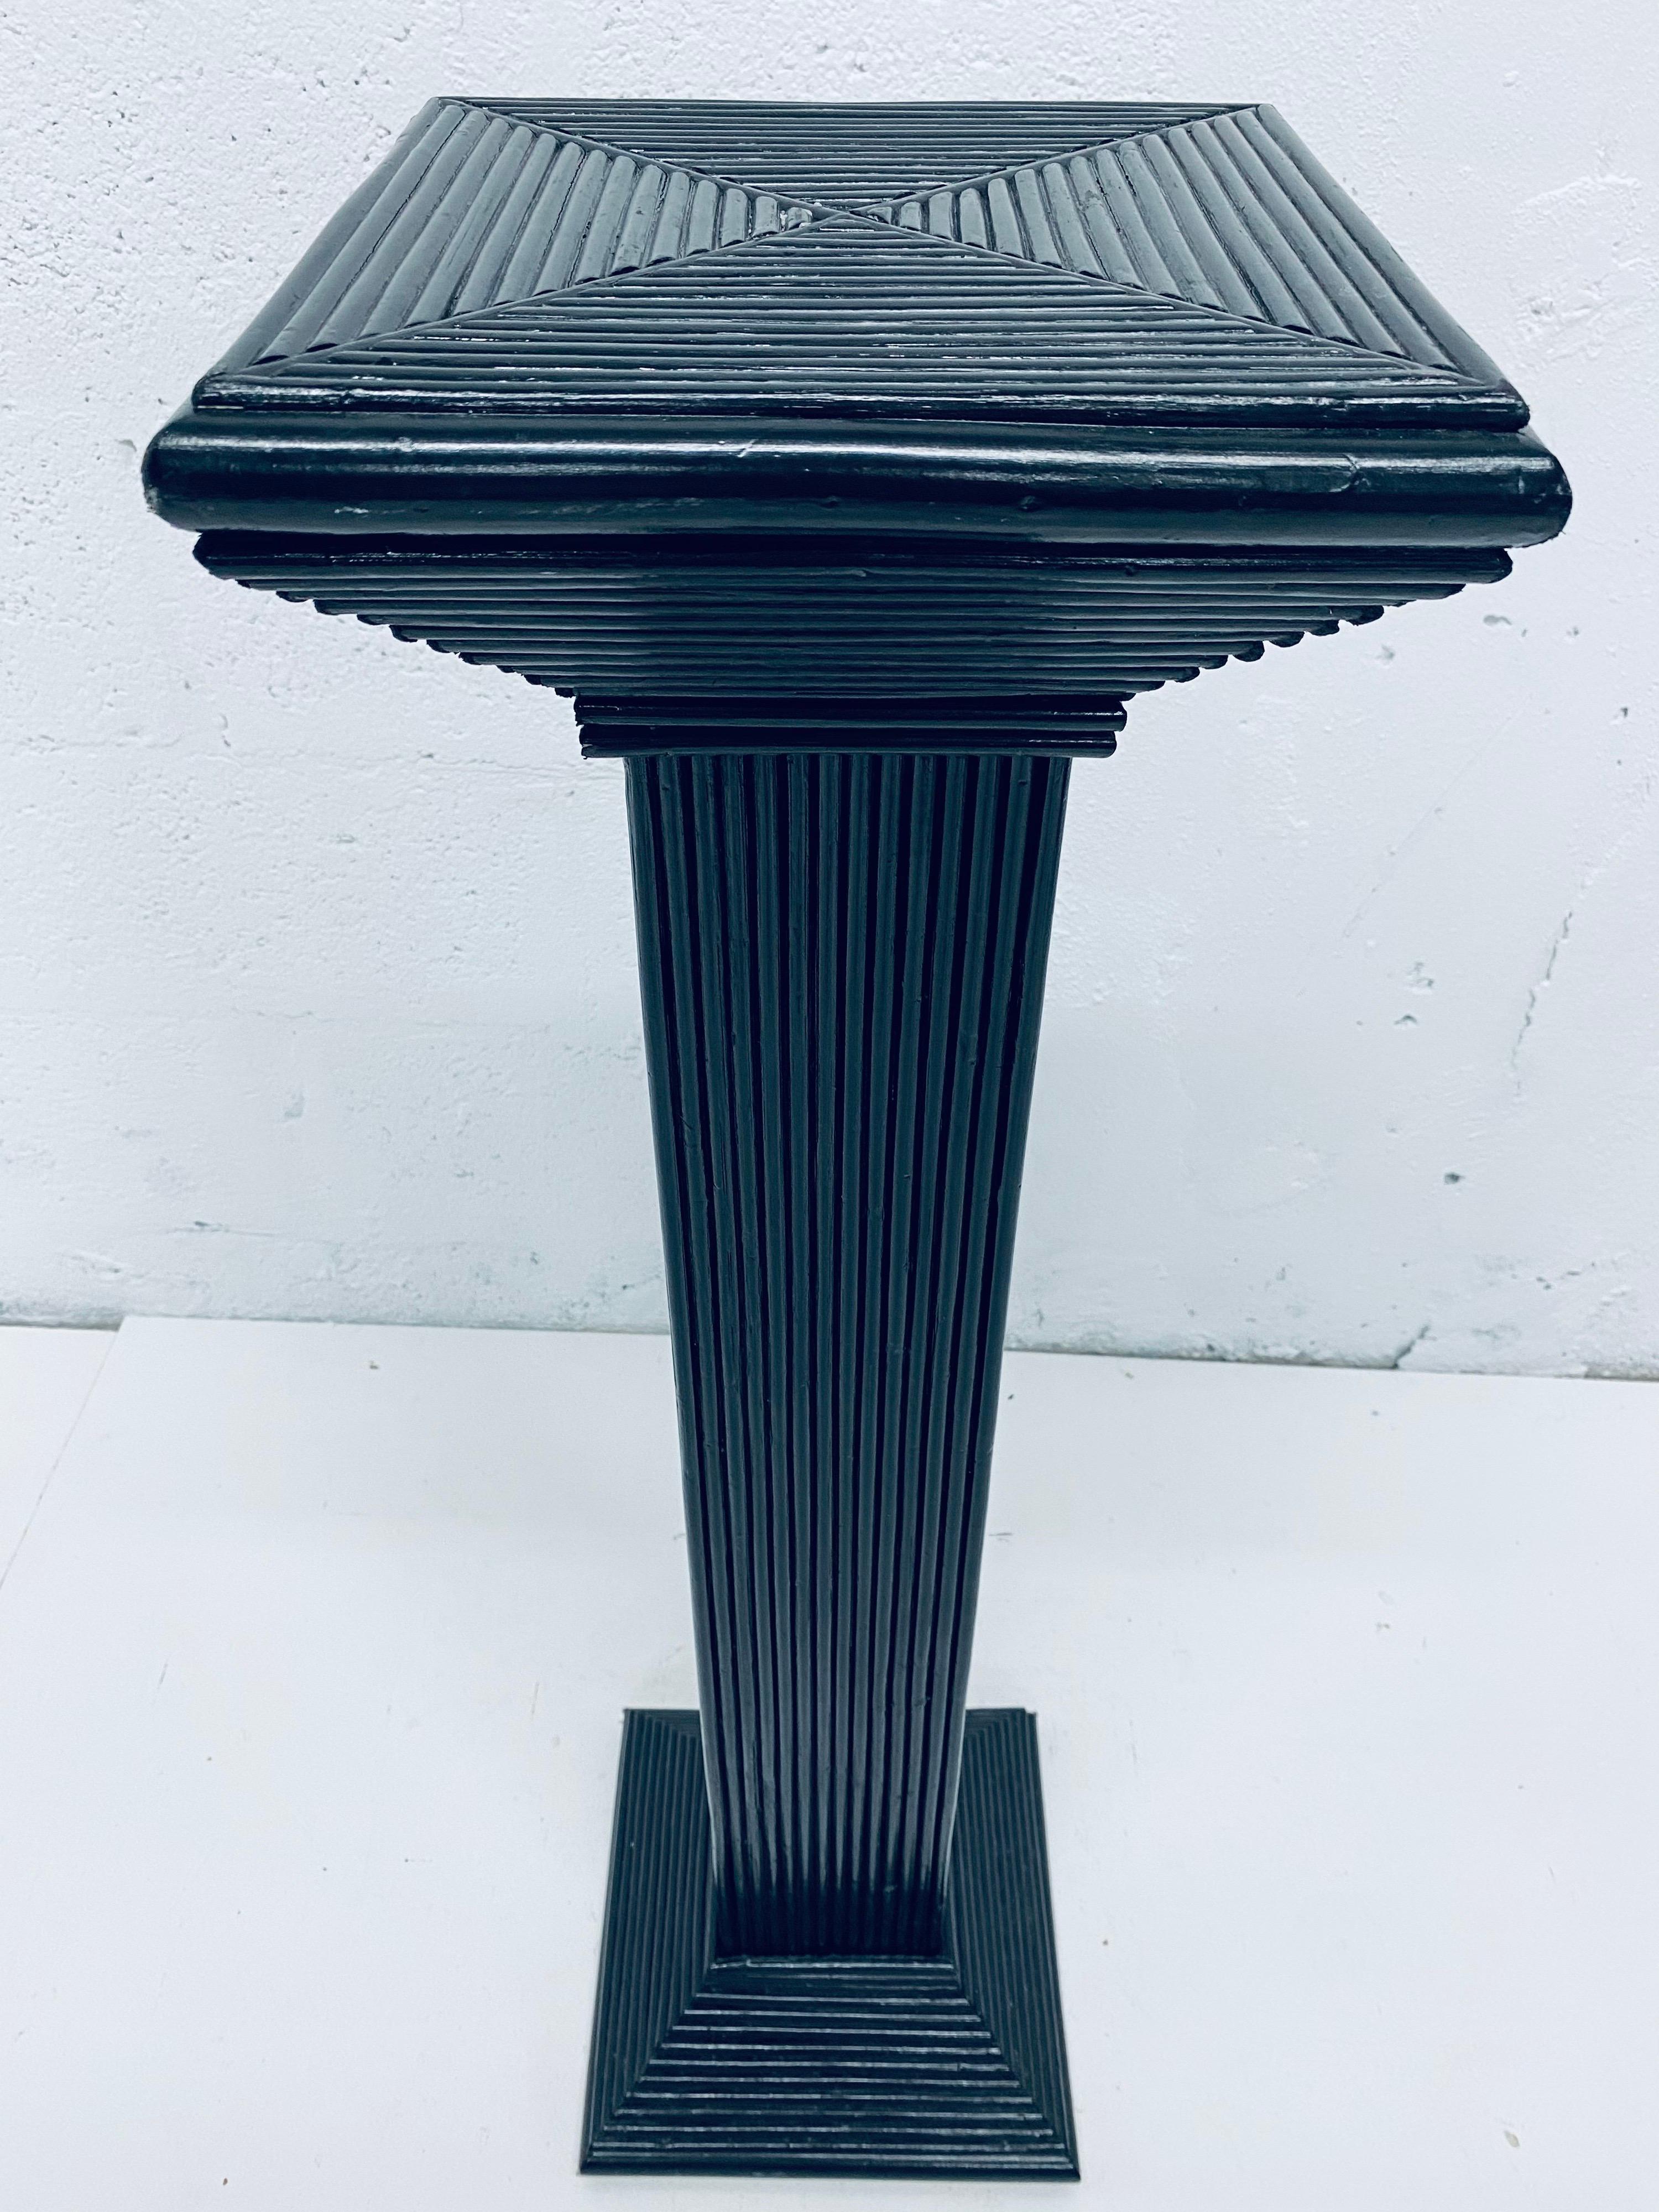 Black lacquered pencil reed rattan pedestal column table from the 1960s. 

Four pedestals available.

Surface dimensions: W9-1/2